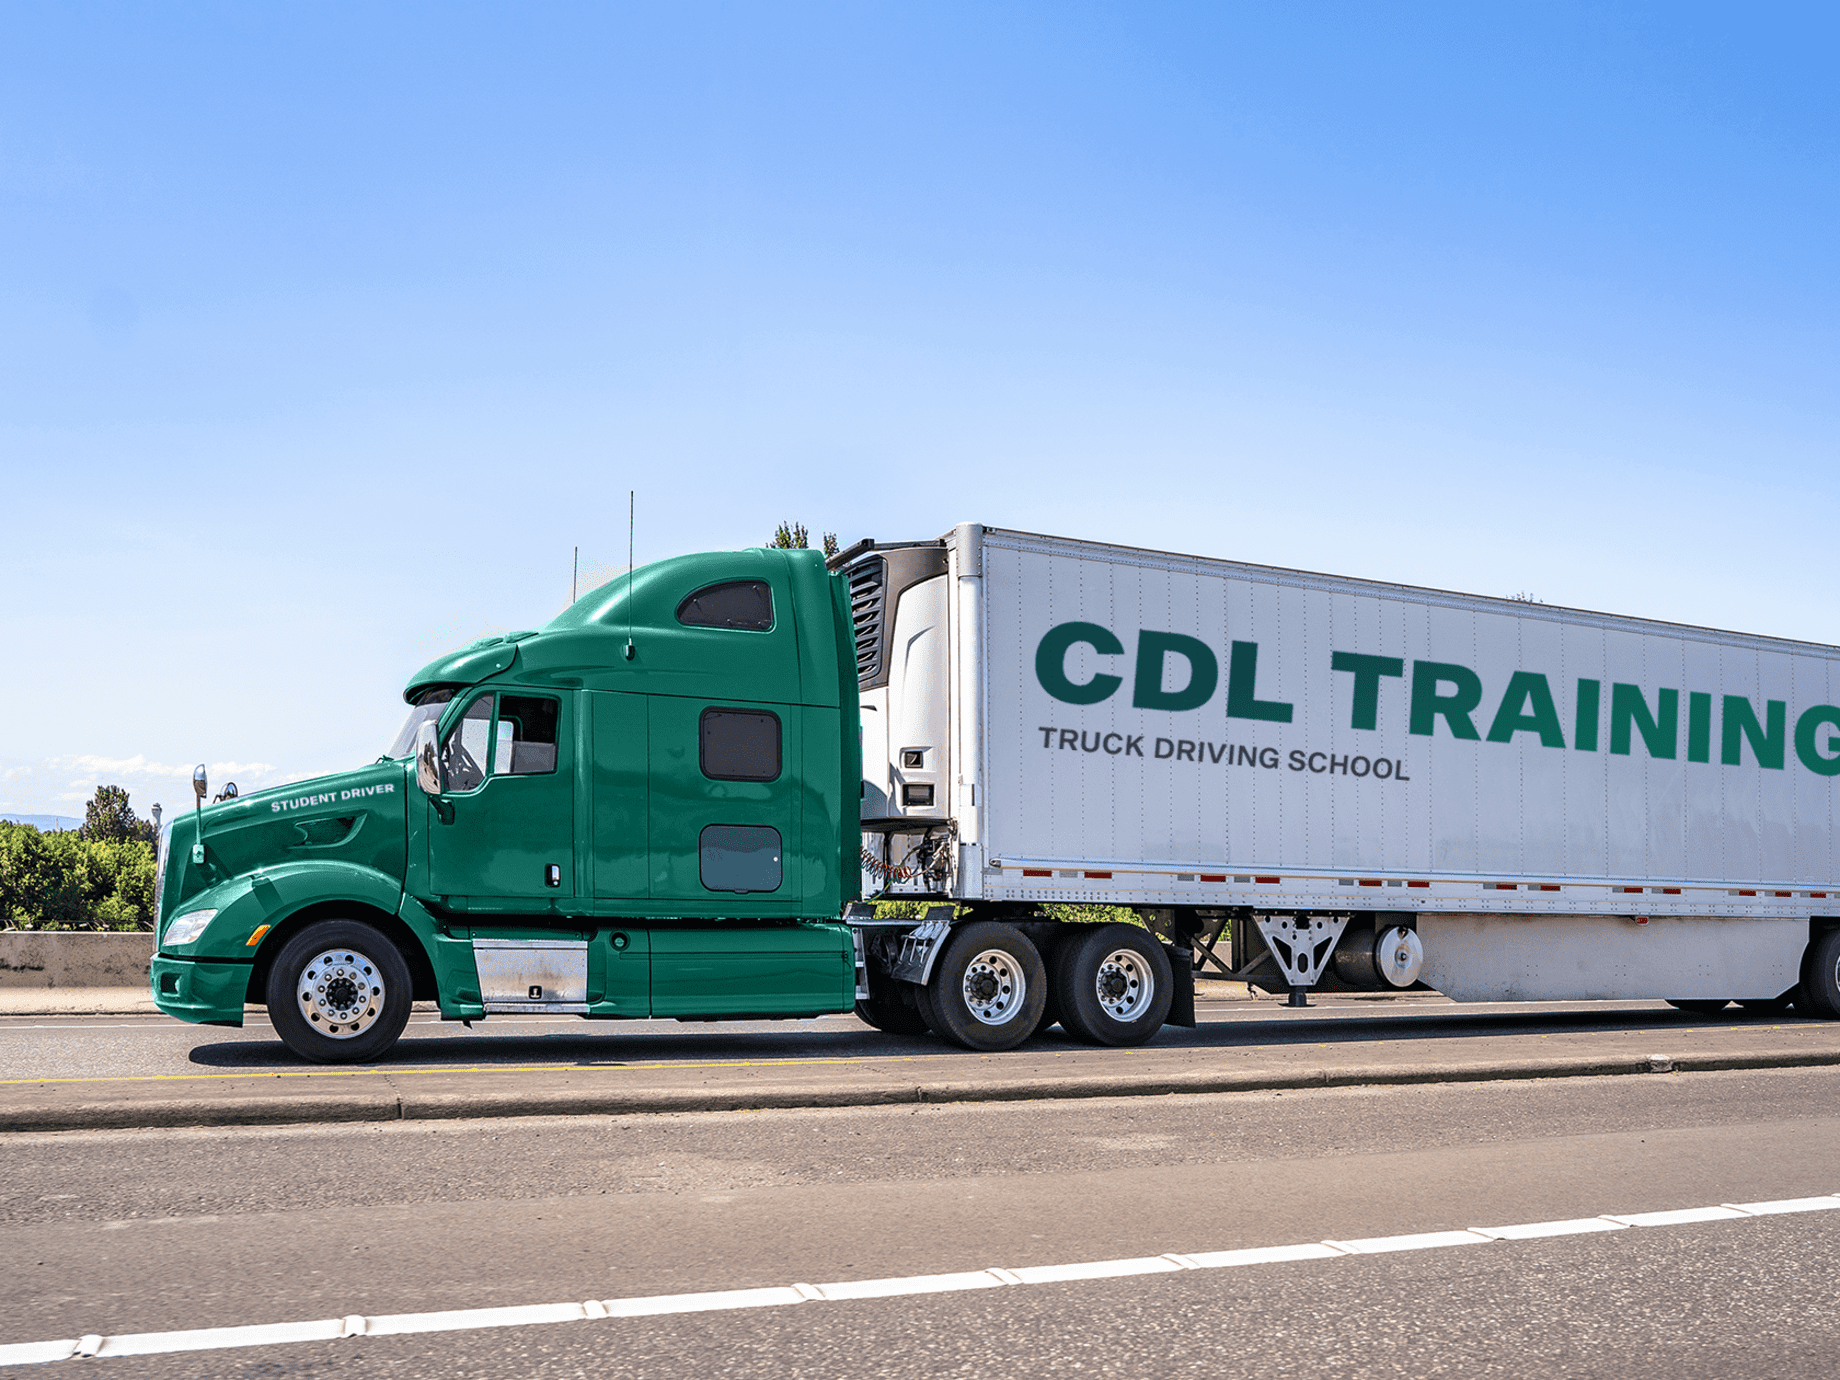 How to get a CDL